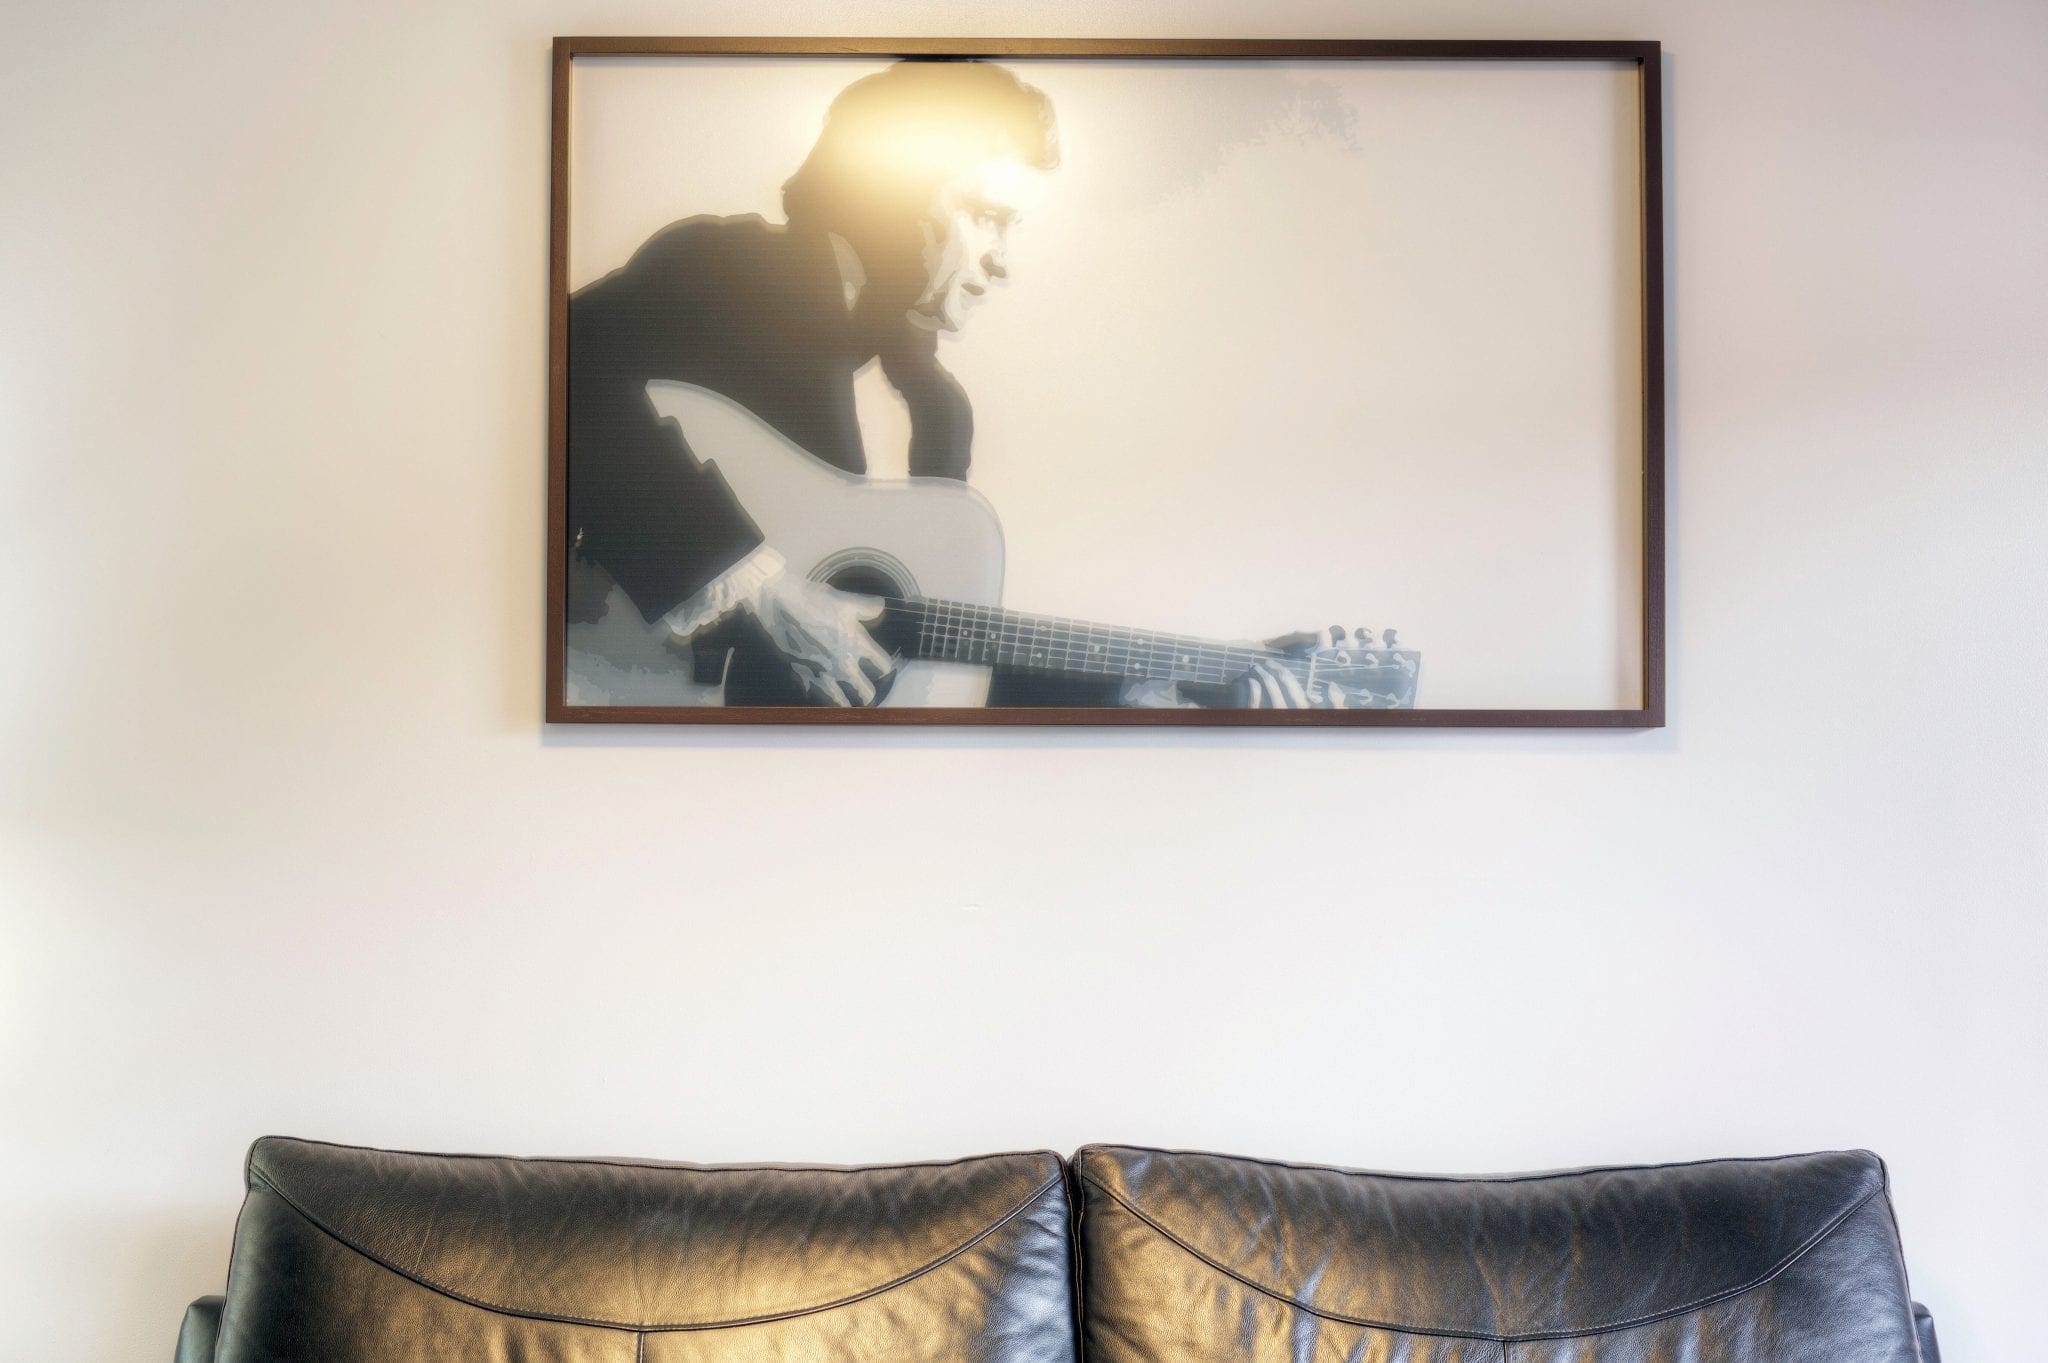 Our Premium King room features unique art including this one of Johnny Cash